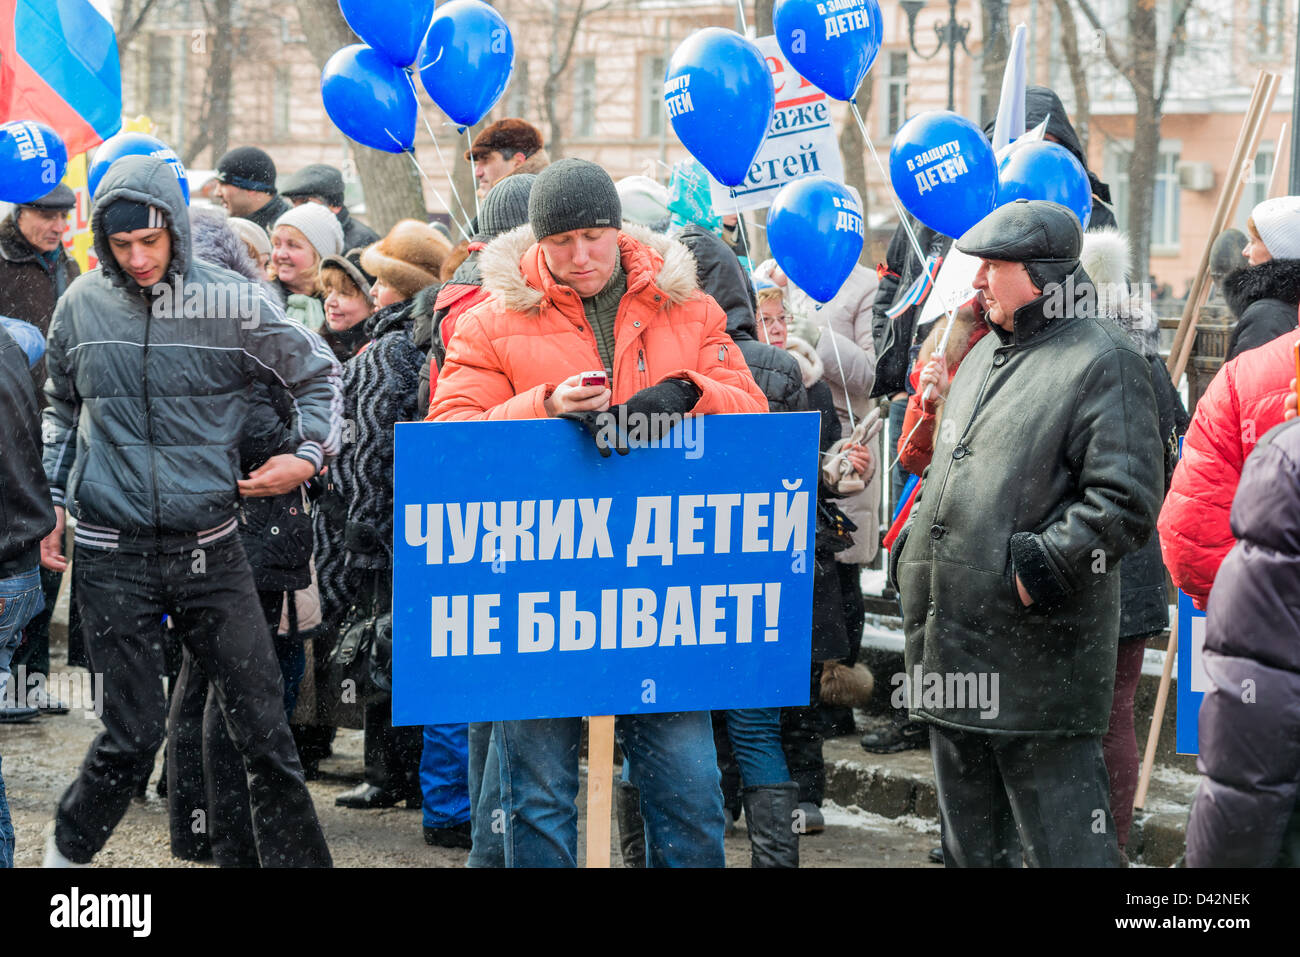 Russian demonstrators rally in support of U.S. adoption ban. Moscow, March 2, 2013 Stock Photo